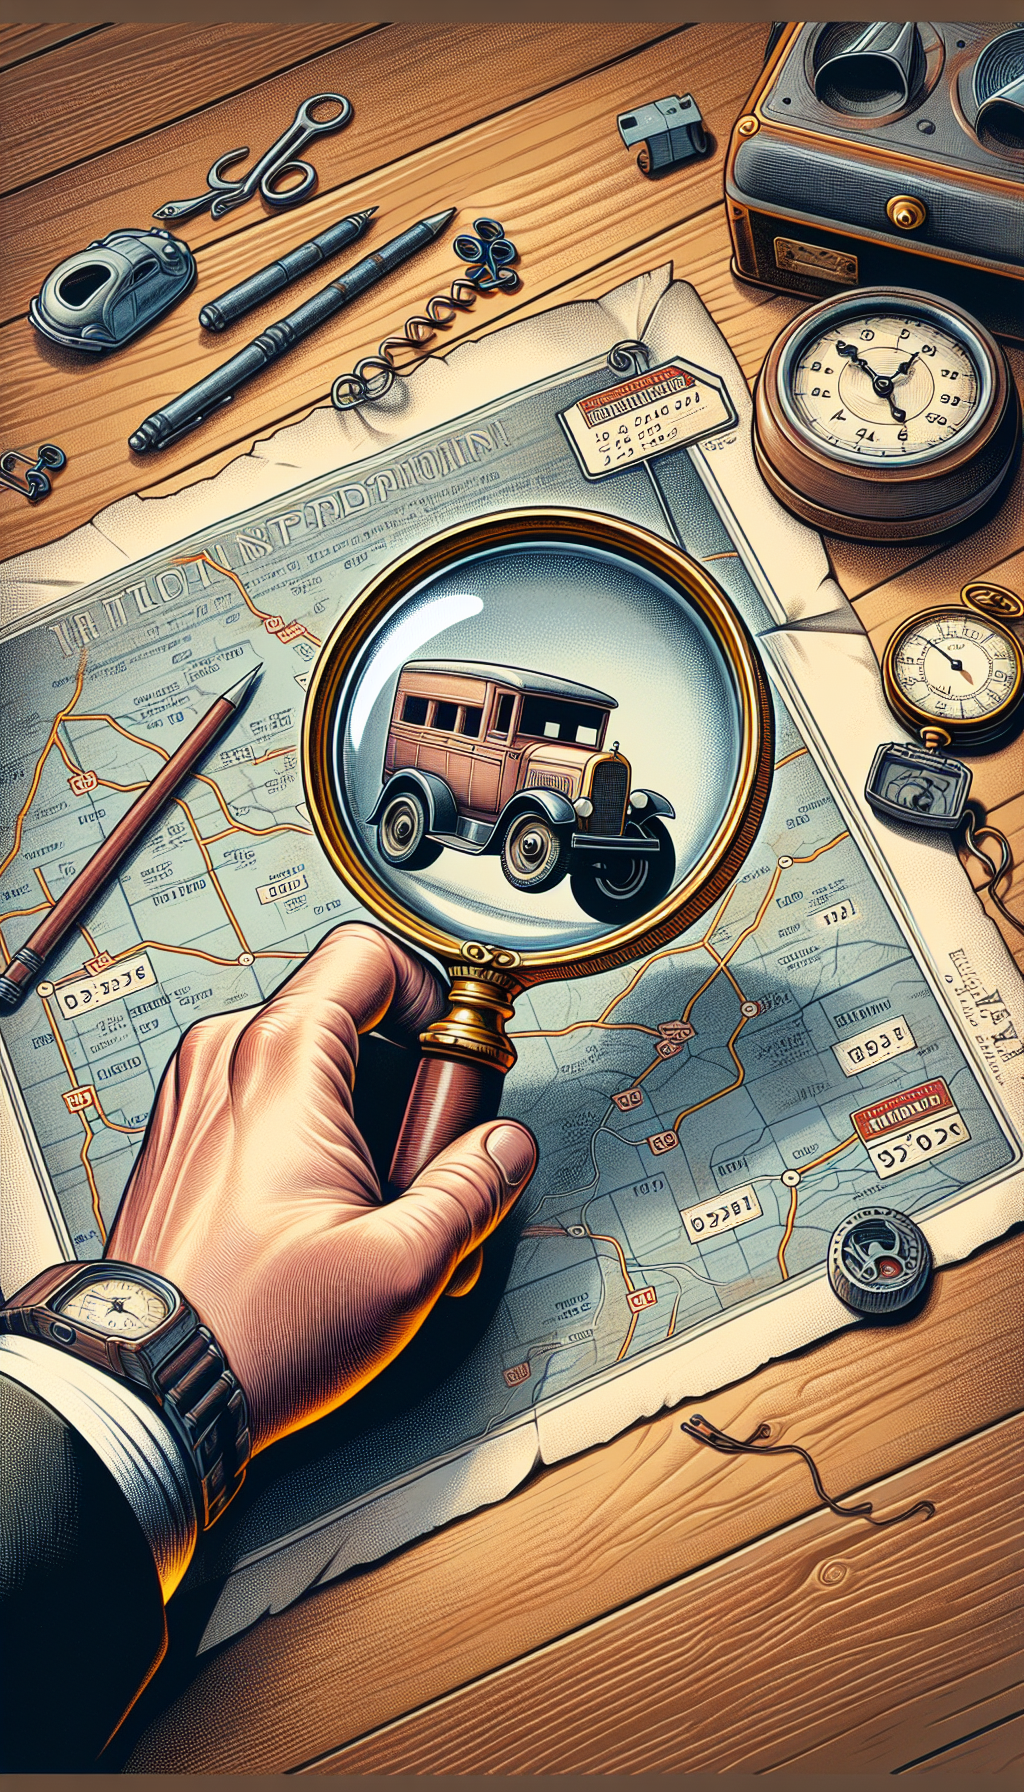 An illustration focuses on an antique magnifying glass hovering over a faded roadmap with key dates and price tags emerging along its route. In the lens reflection, we see a mint-condition vintage Tonka truck. The magnifying glass is held by a toy collector's hand, embellished with a vintage watch, hinting at the passage of time and the ageless value of Tonka toys.